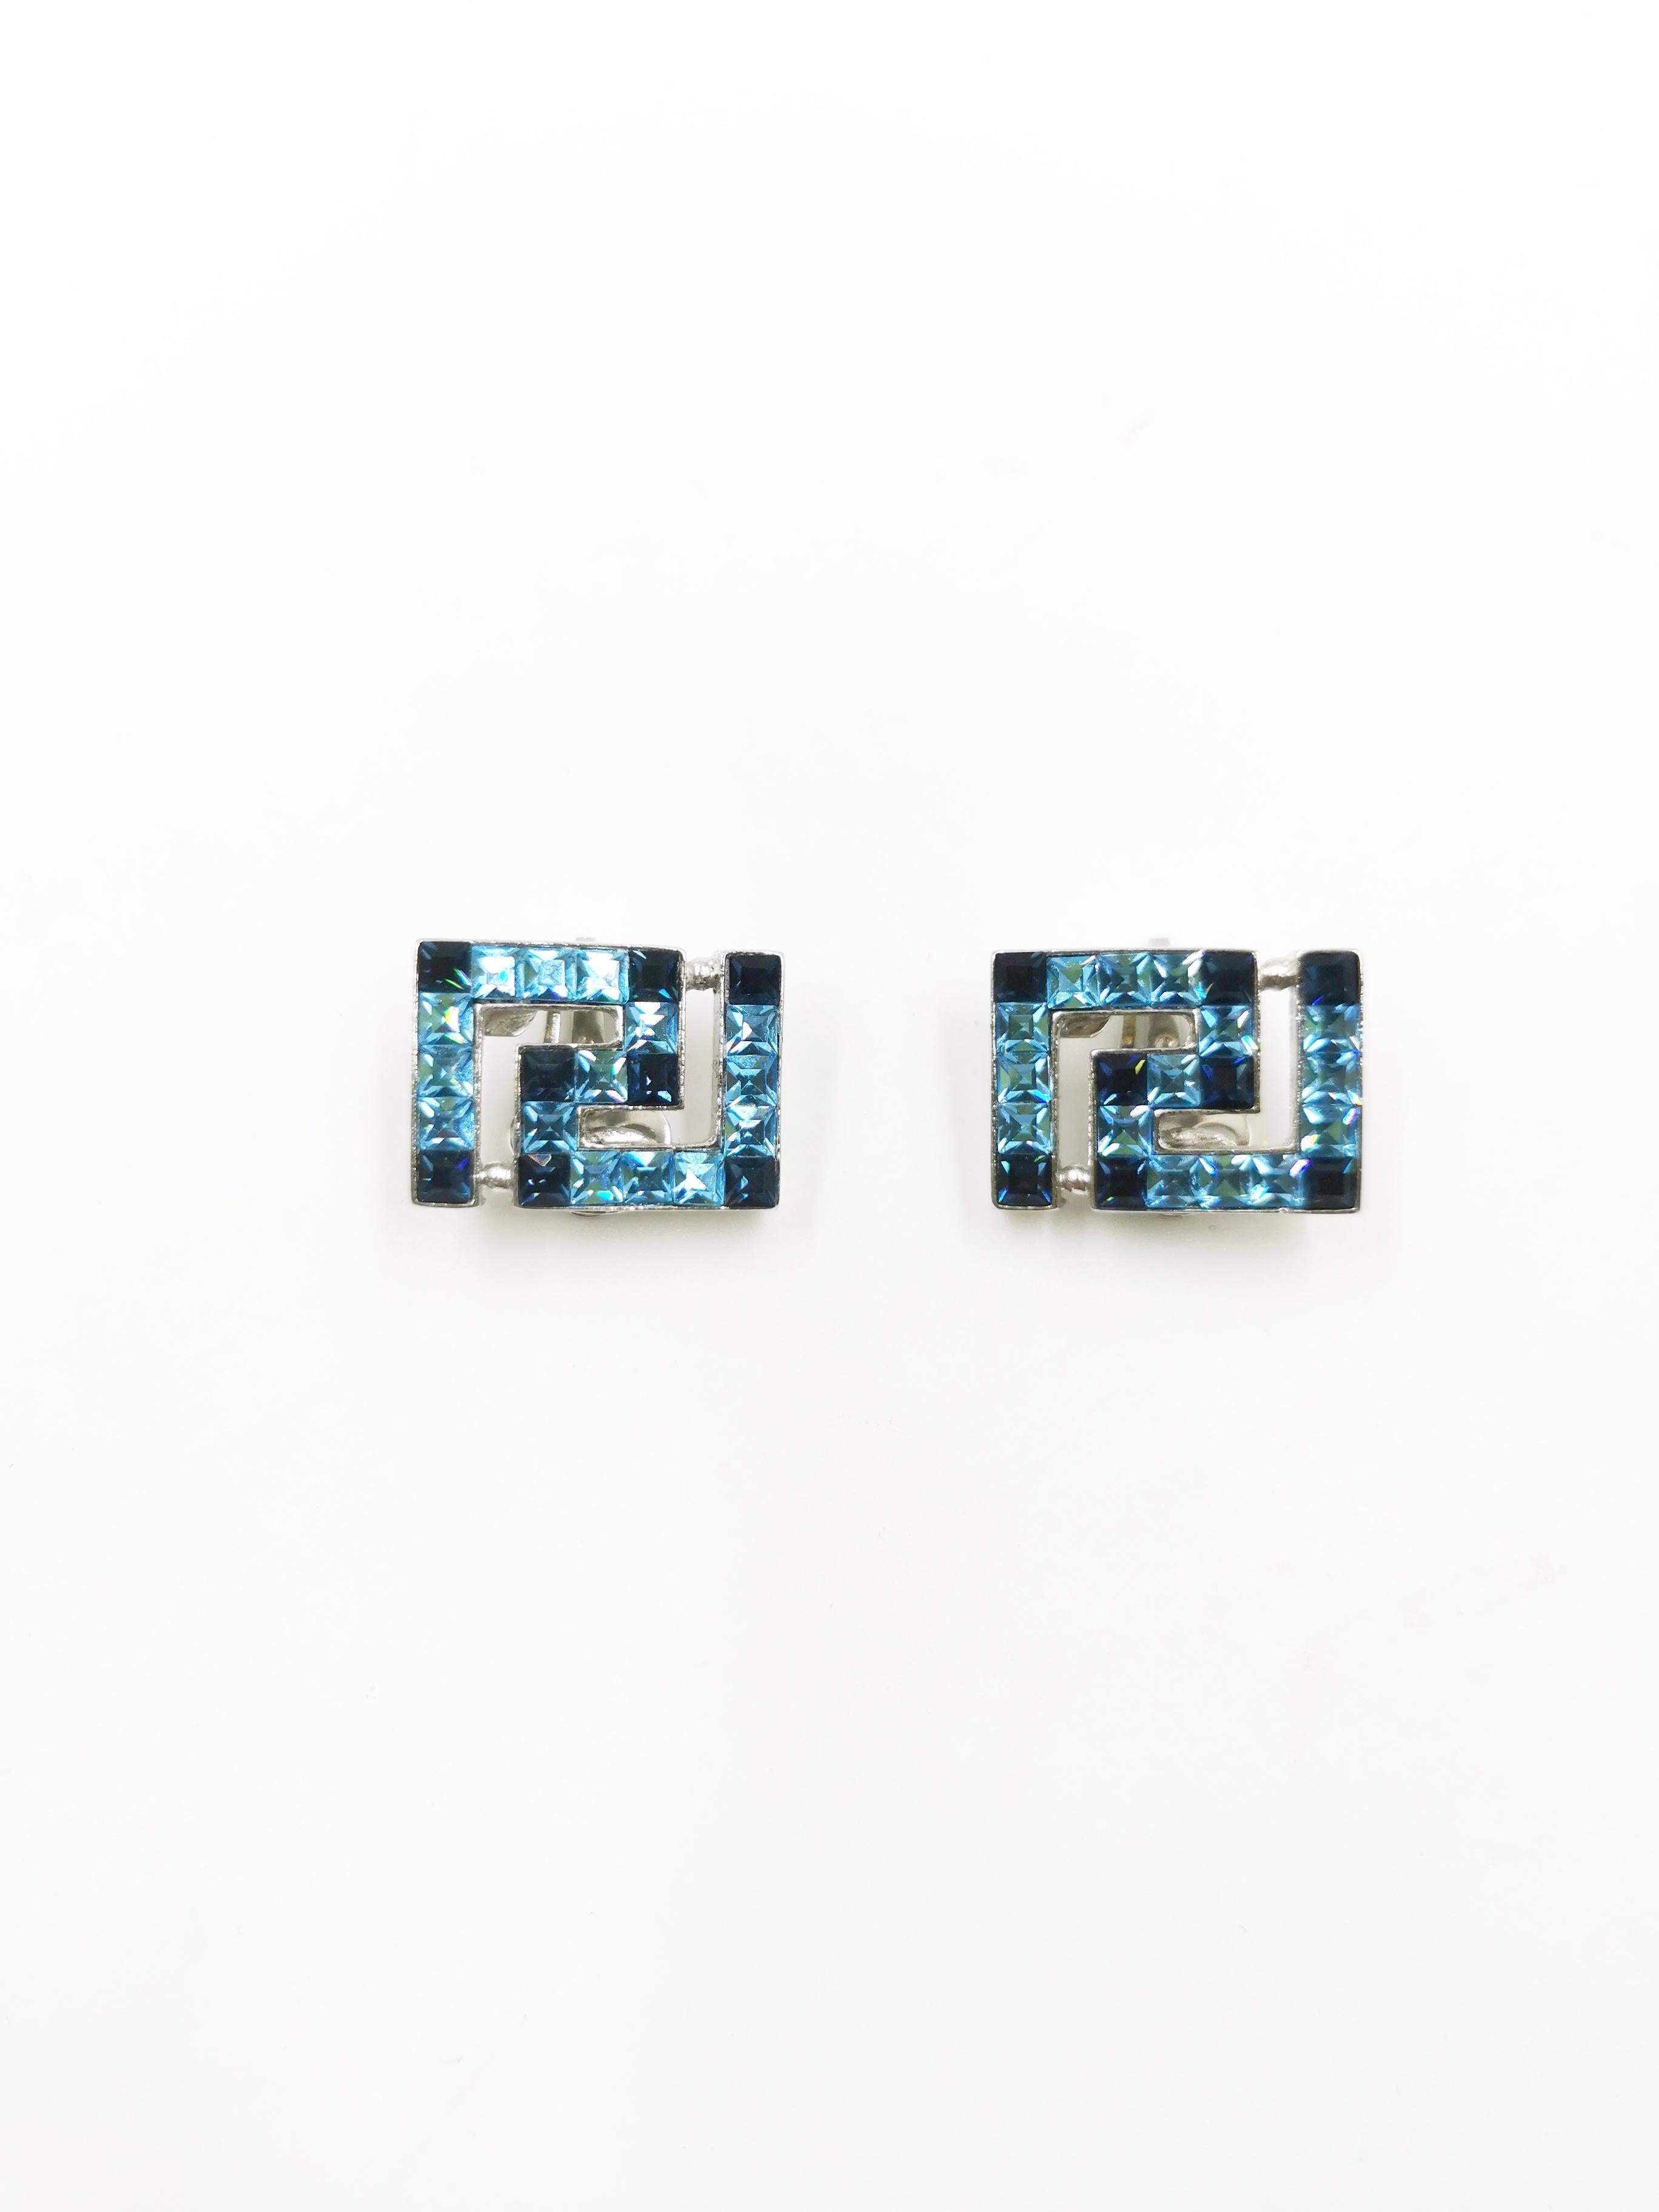 Vintage Gianni Versace Greca shape Earrings in Blue, this brand new vintage item still in original box is not to be seen elsewhere. A versace collector piece!

Feature
Material: Silver and Blue Rhinestones
Condition: Mint Old Stock
Colour: Silver